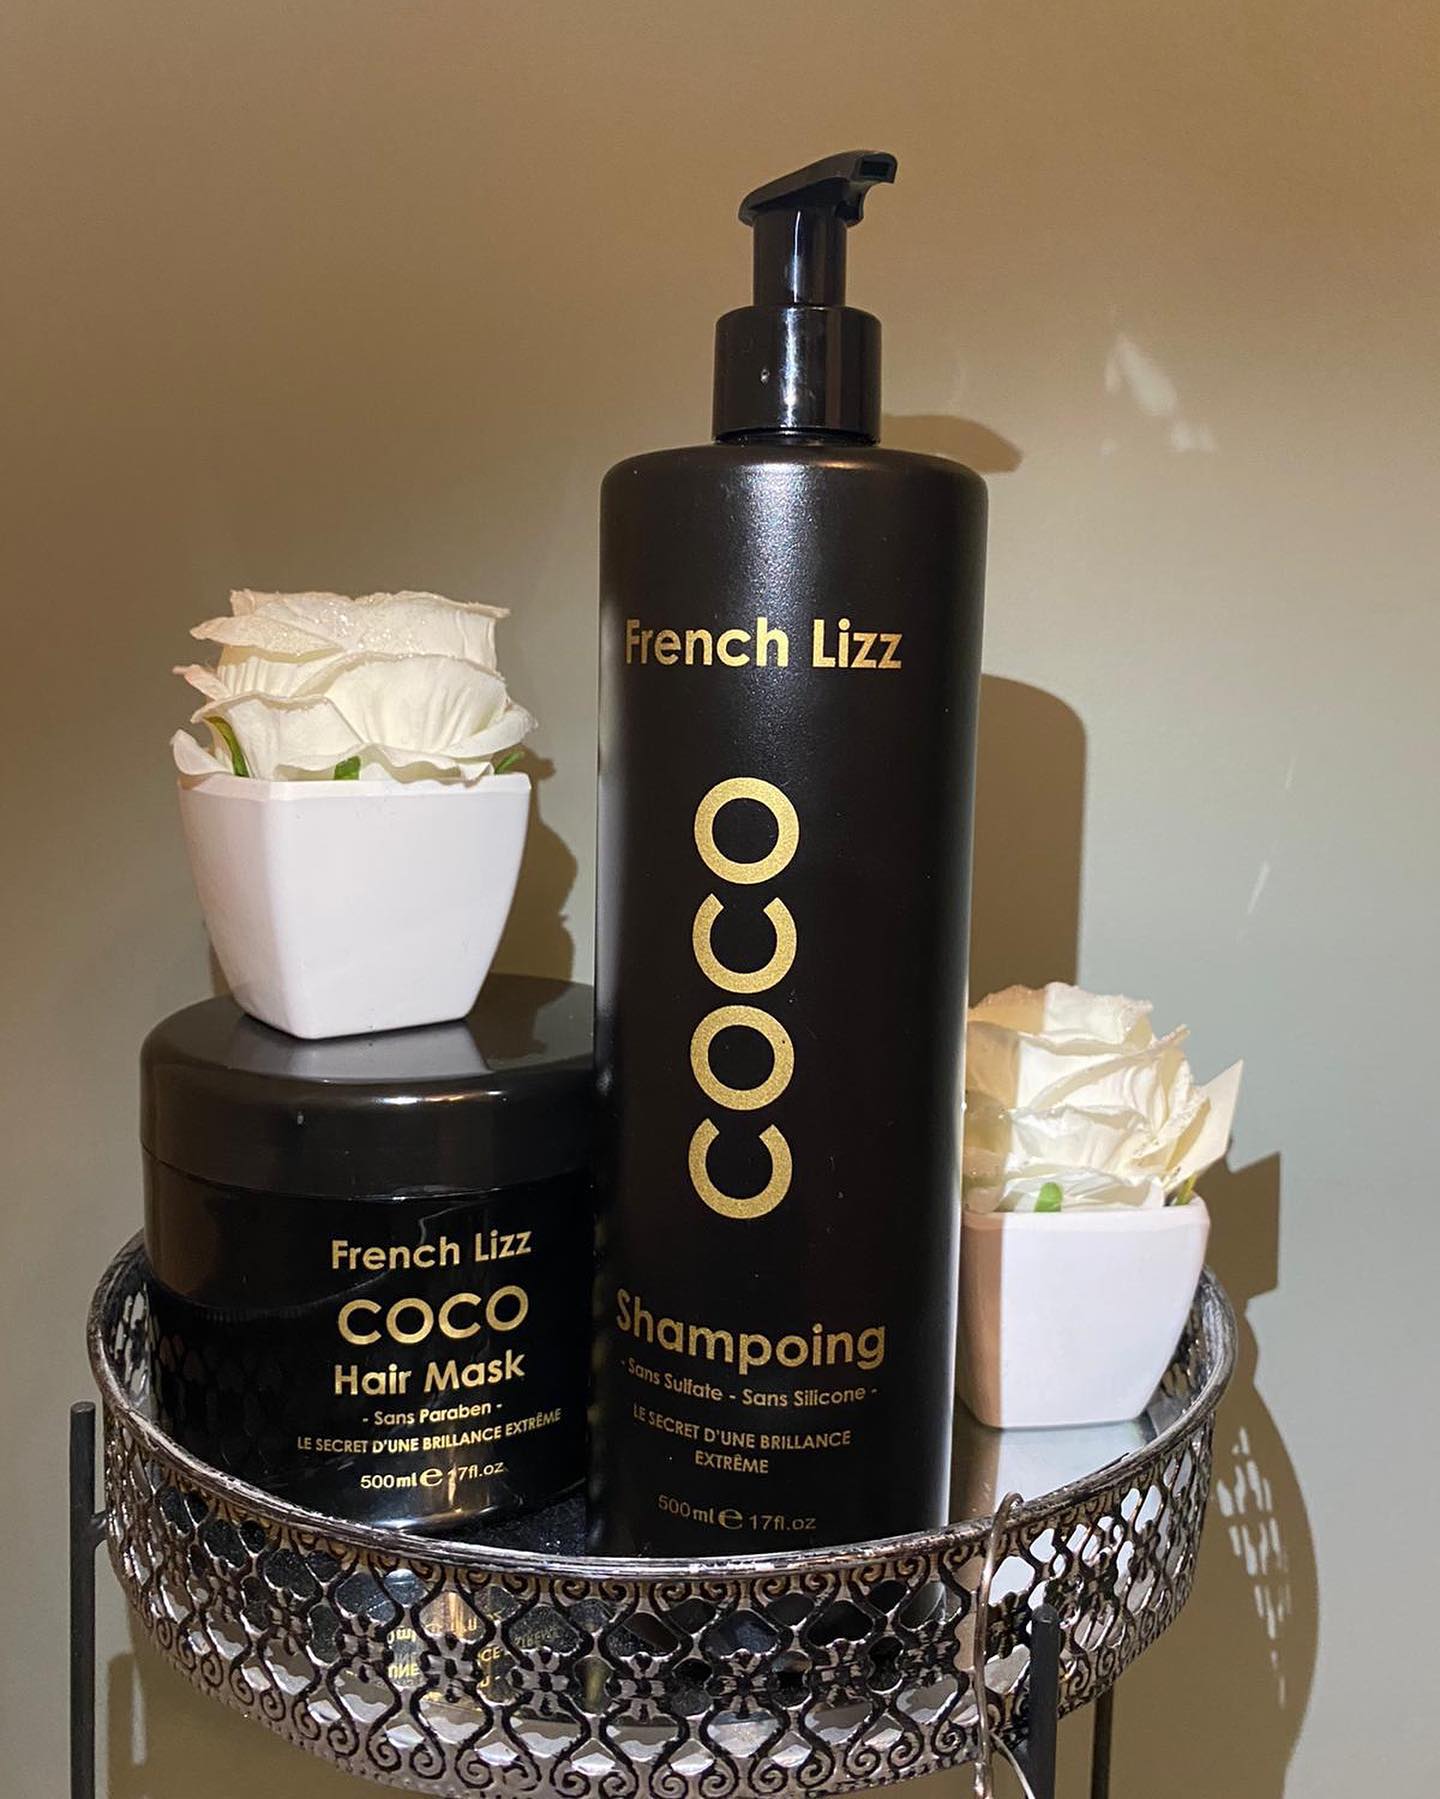 Soins French Lizz Coco shampoing & masque